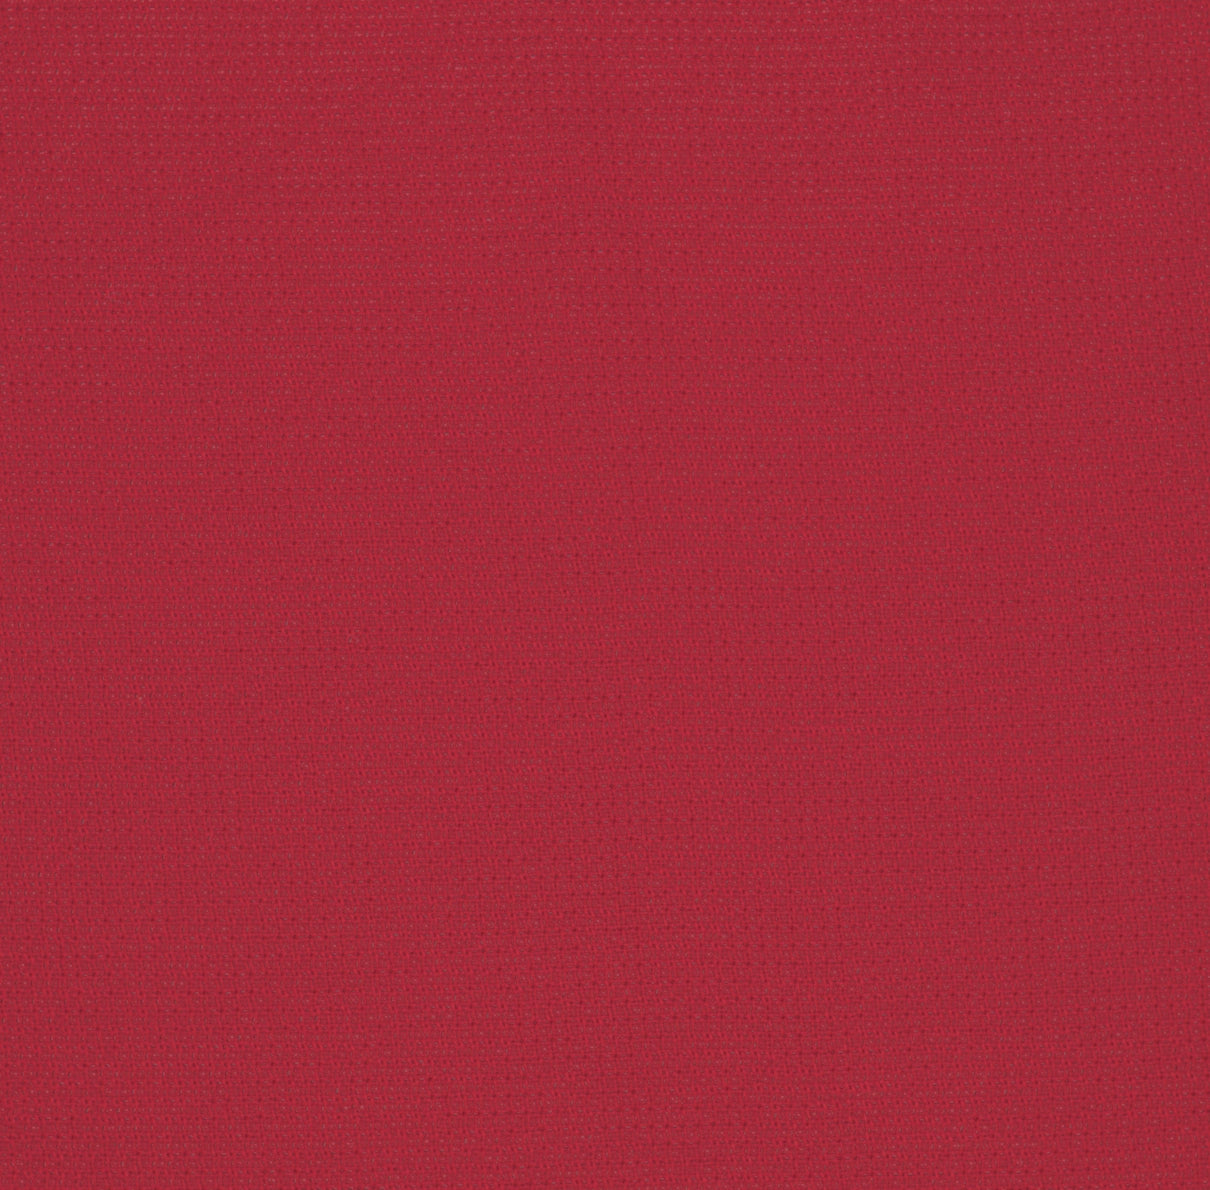 36002-05 Chinese Red Polyester Crepe Plain Dyed 100% 210g/yd 54" plain dyed polyester red woven Solid Color - knit fabric - woven fabric - fabric company - fabric wholesale - fabric b2b - fabric factory - high quality fabric - hong kong fabric - fabric hk - acetate fabric - cotton fabric - linen fabric - metallic fabric - nylon fabric - polyester fabric - spandex fabric - chun wing hing - cwh hk - fabric worldwide ship - 針織布 - 梳織布 - 布料公司- 布料批發 - 香港布料 - 秦榮興